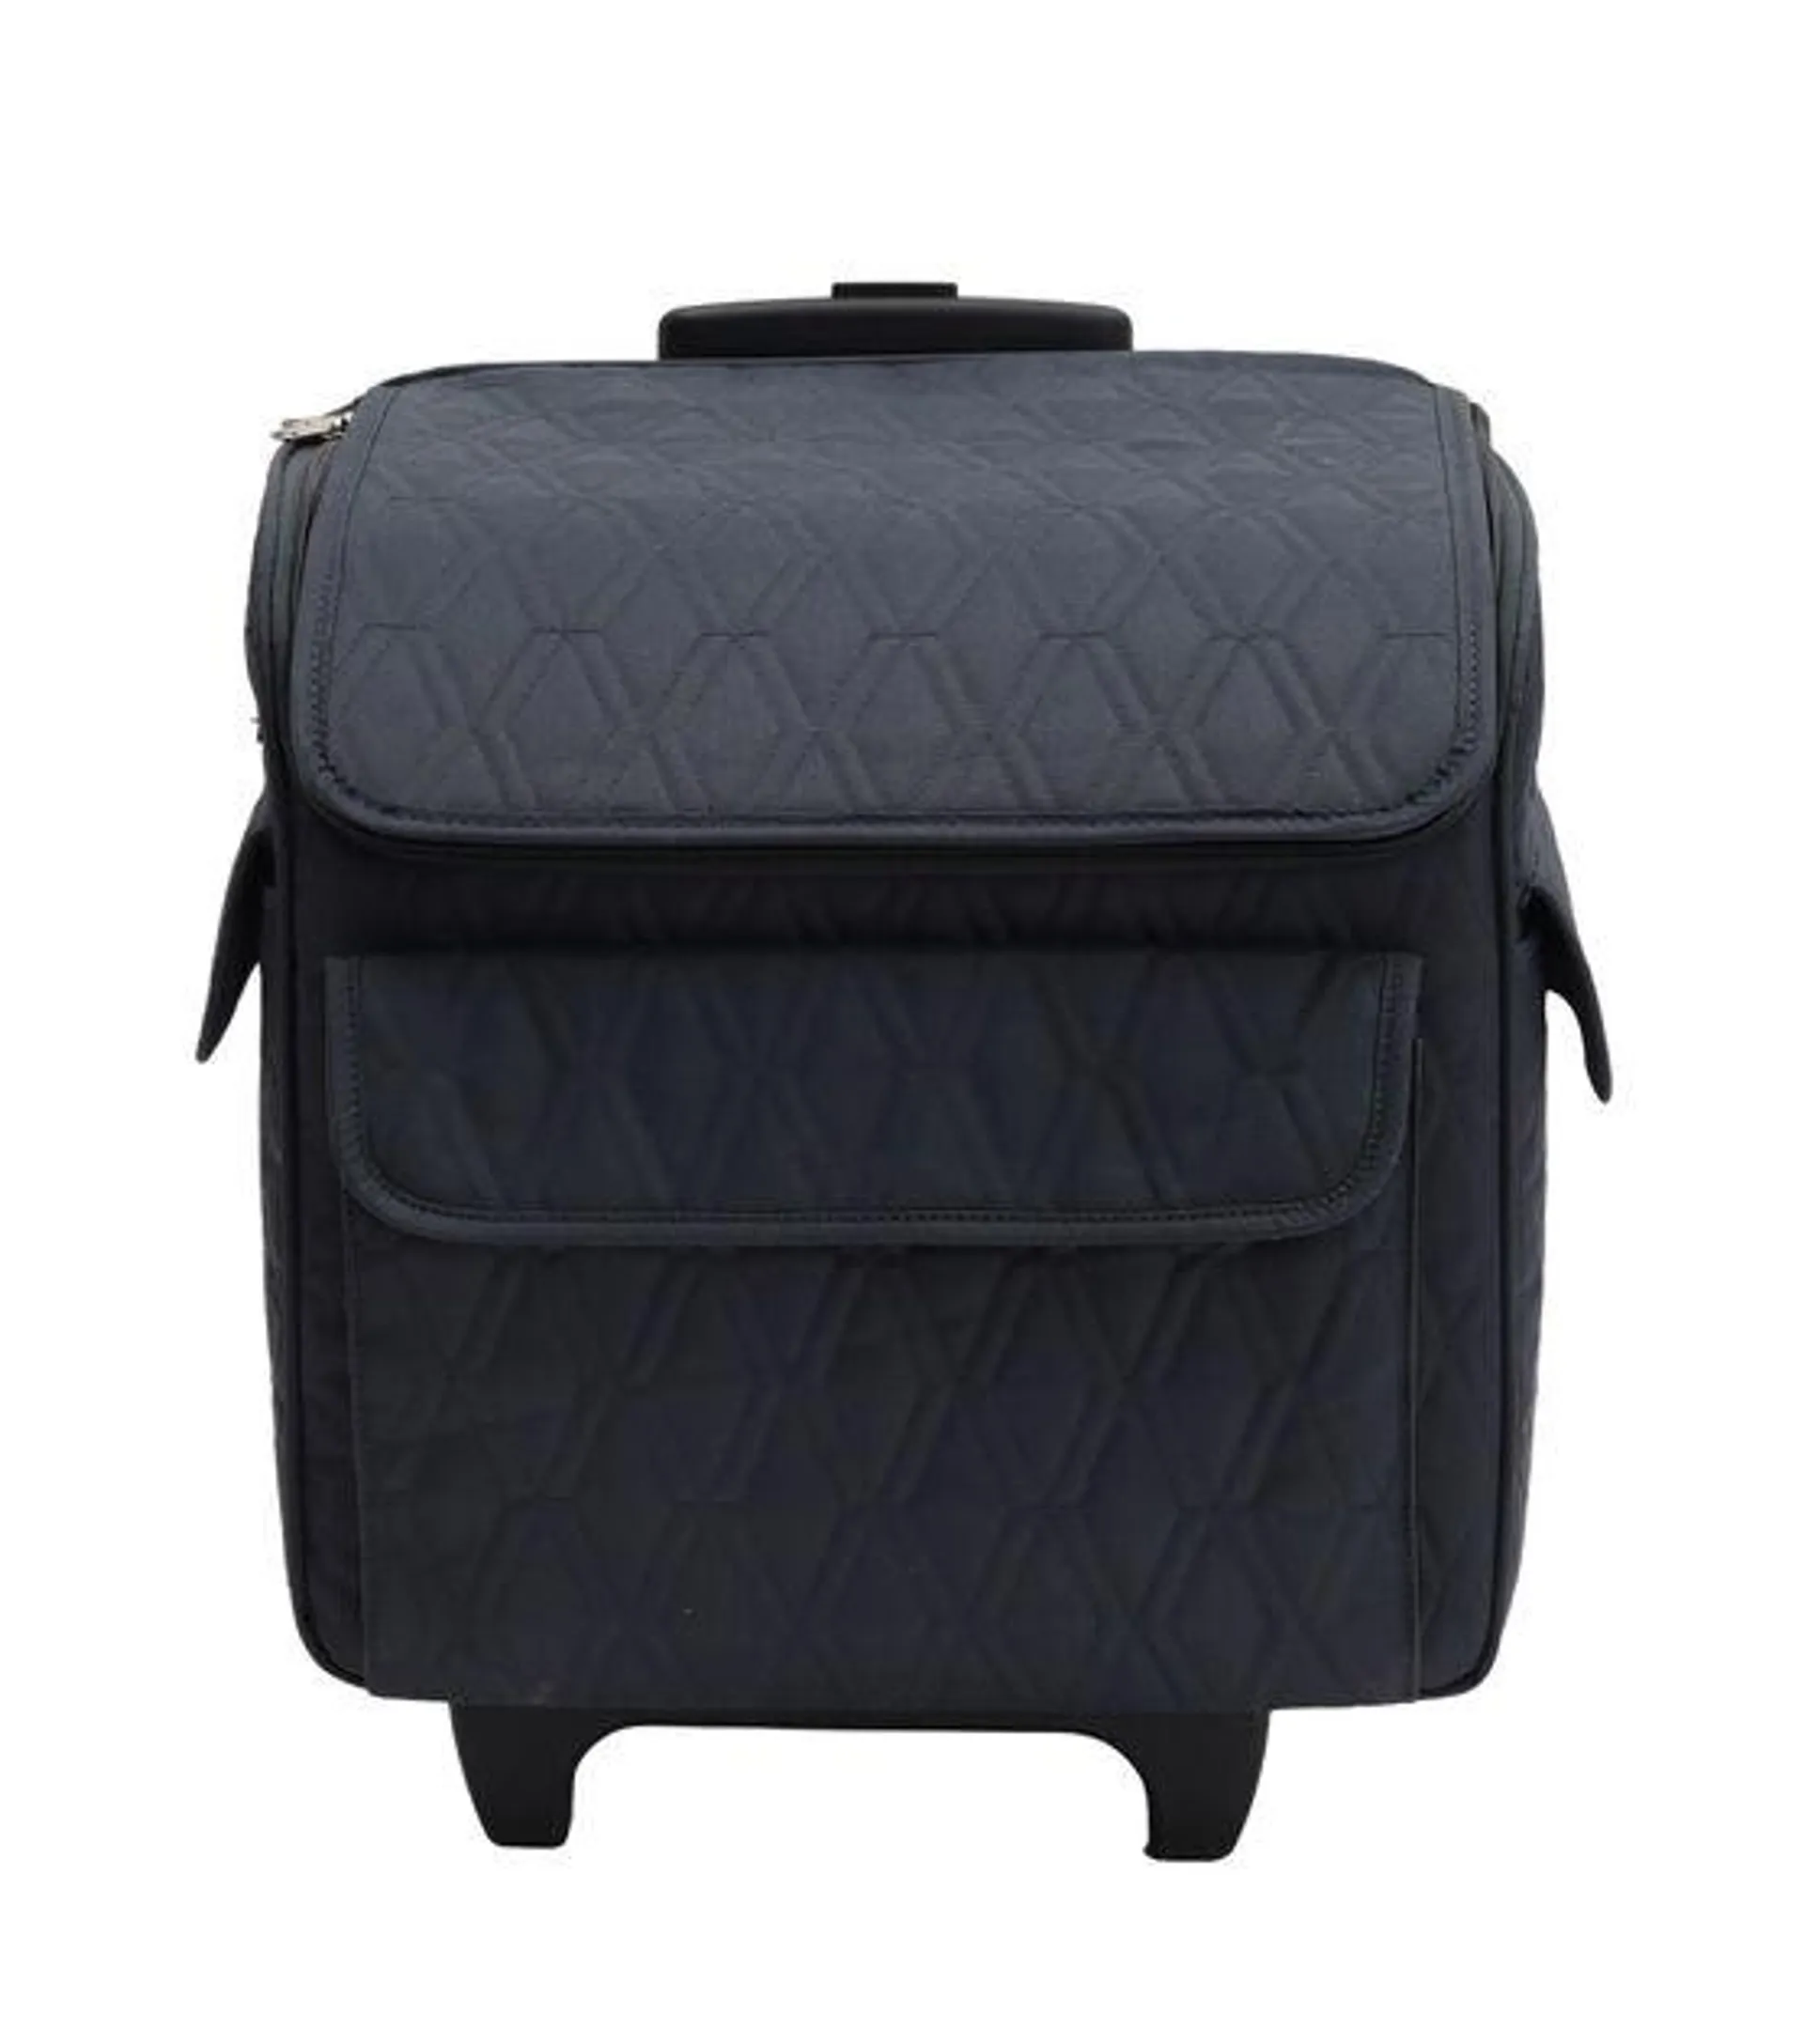 14.5" Black Quilted Polyester Rolling Storage Tote by Top Notch